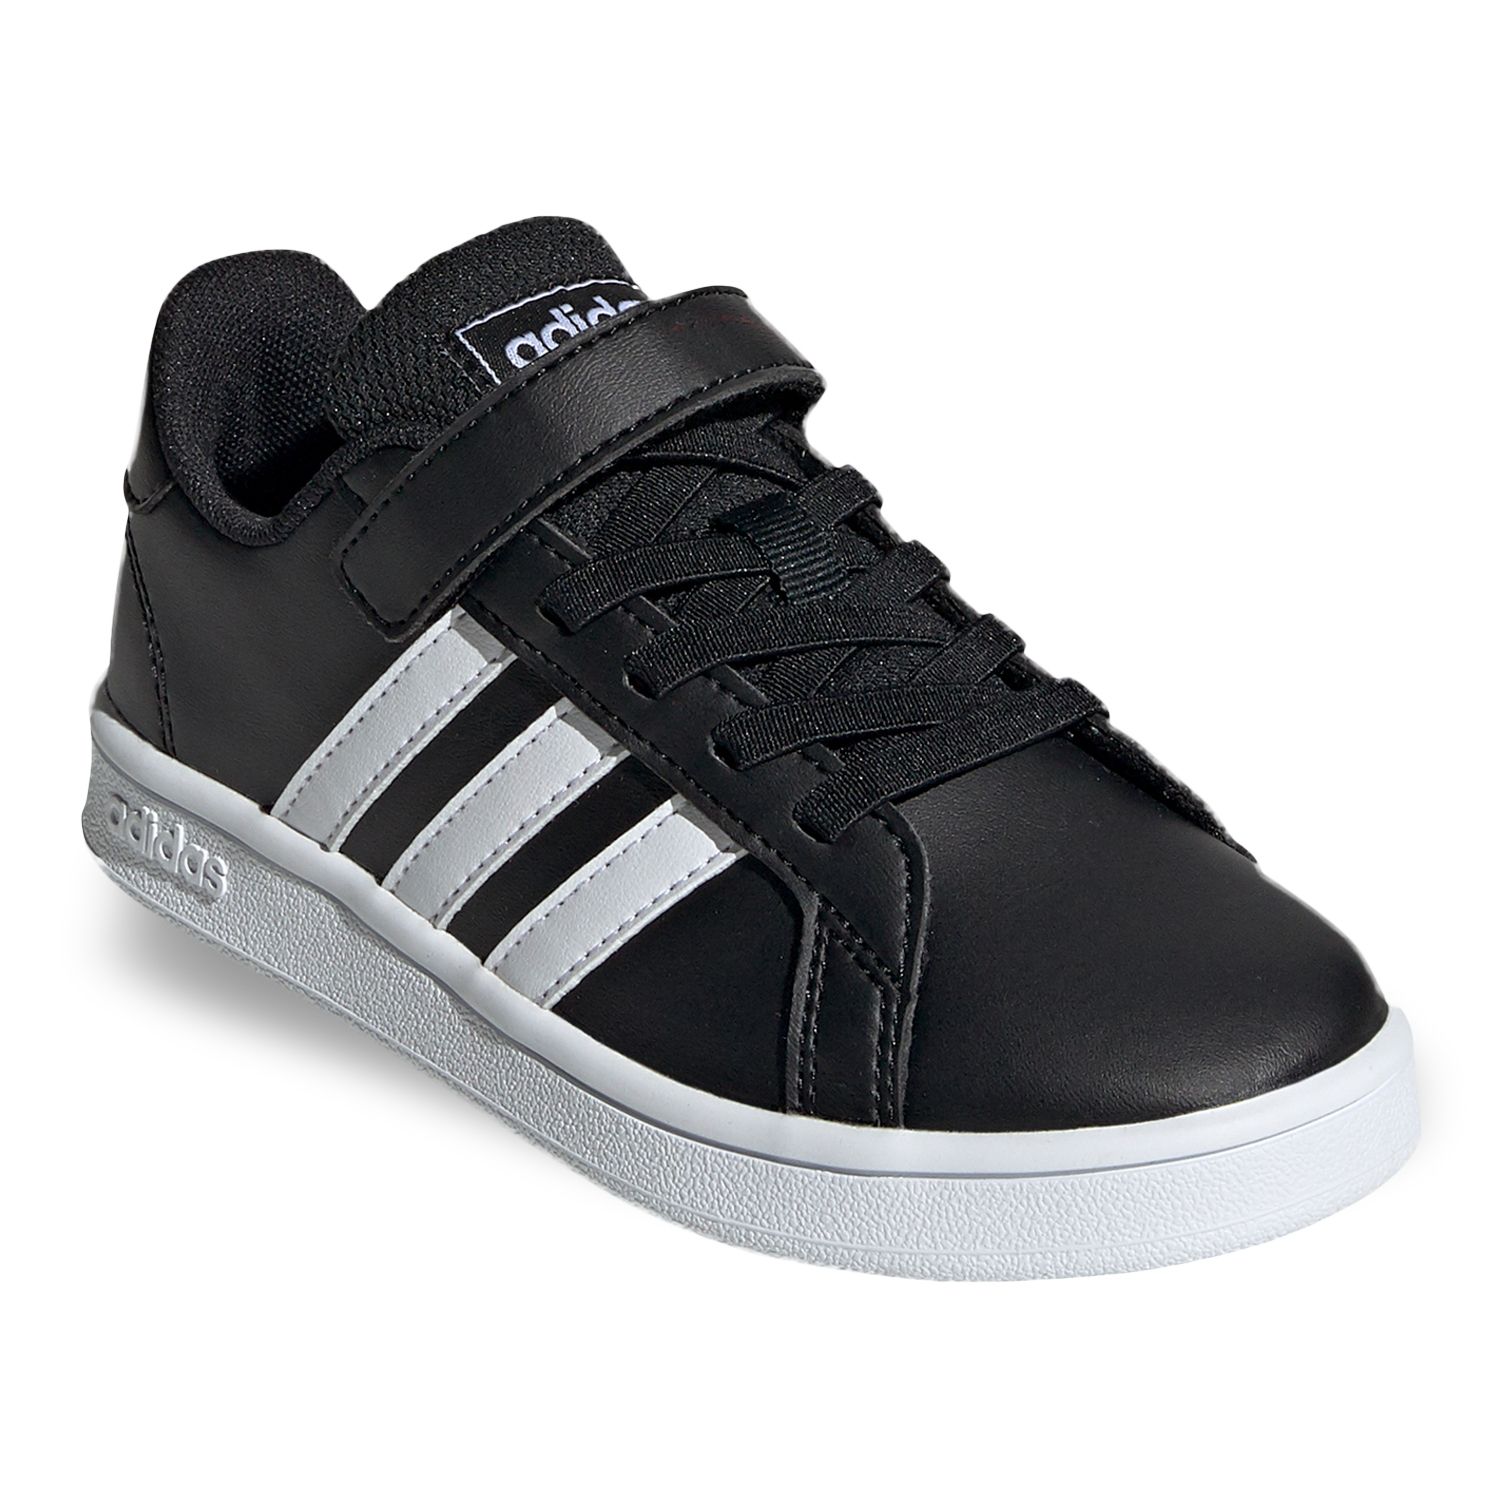 adidas grand court youth